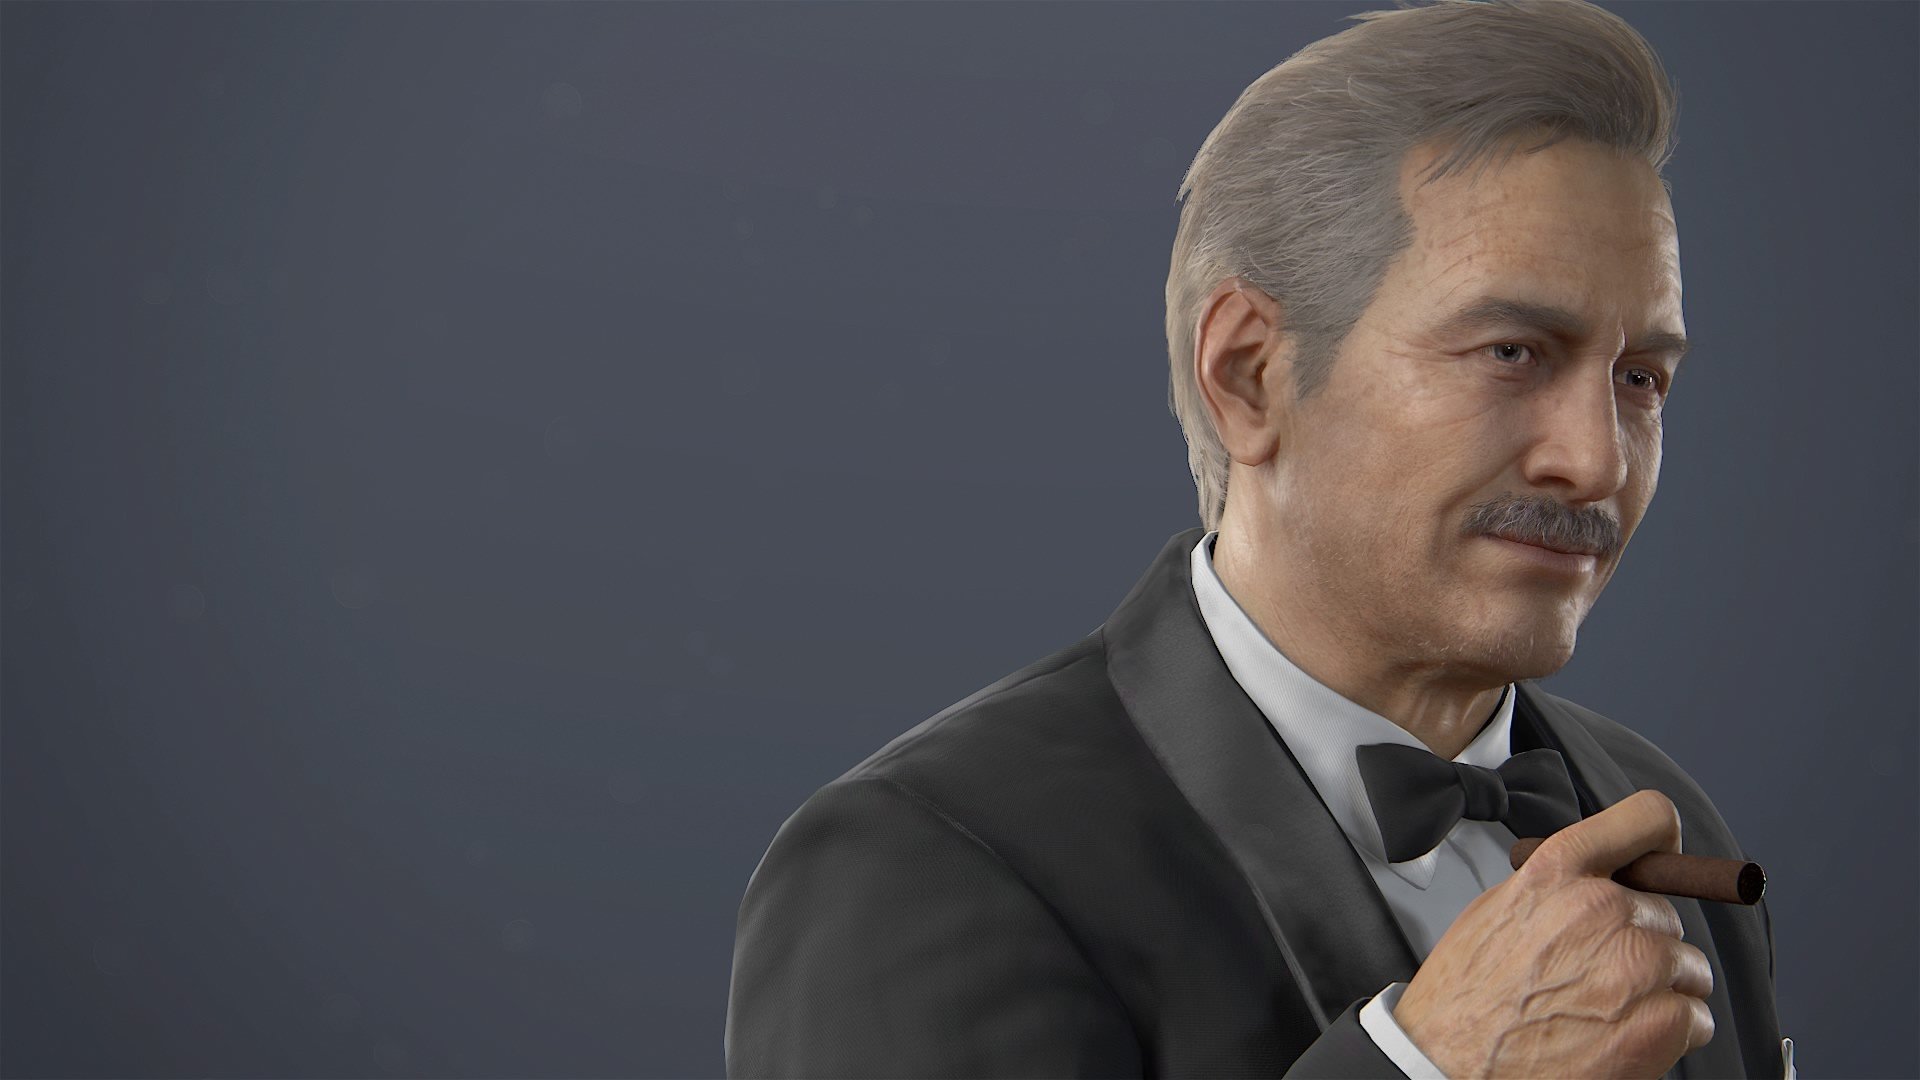 Uncharted 4: A Thiefs End, PlayStation 4, Gray hair, Old Wallpaper